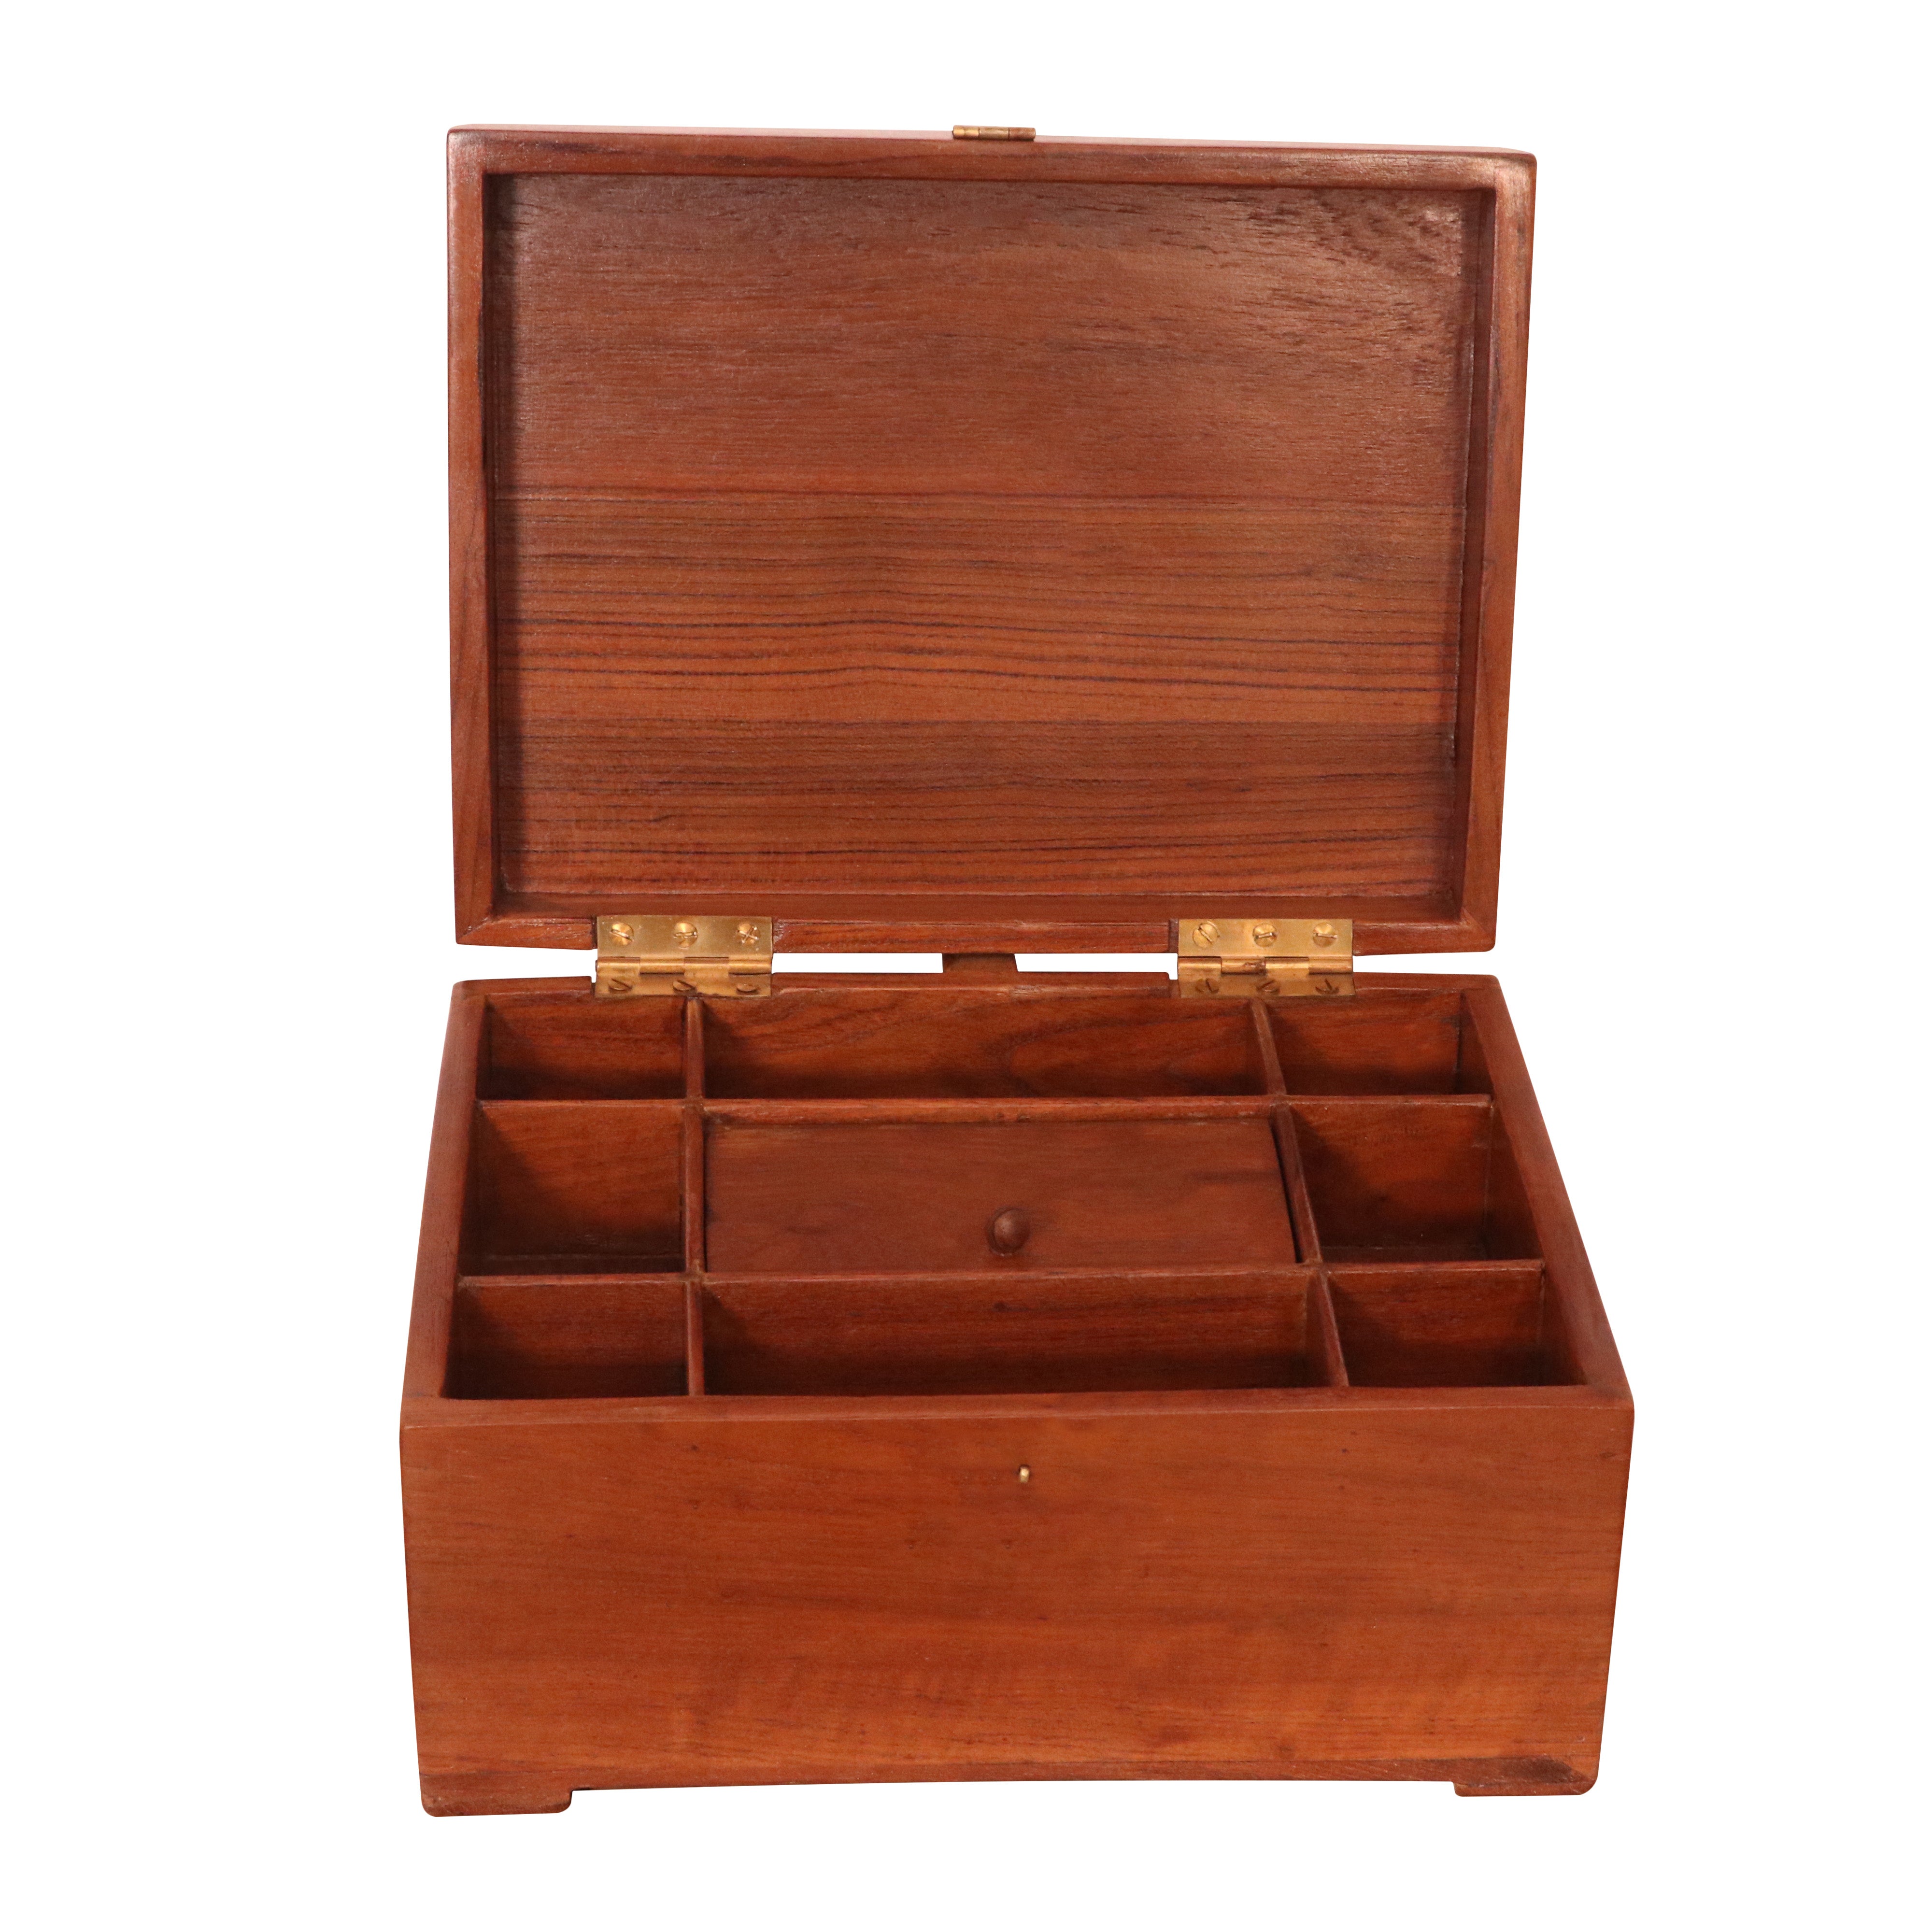 Solid wood wooden box with compartments Wooden Box